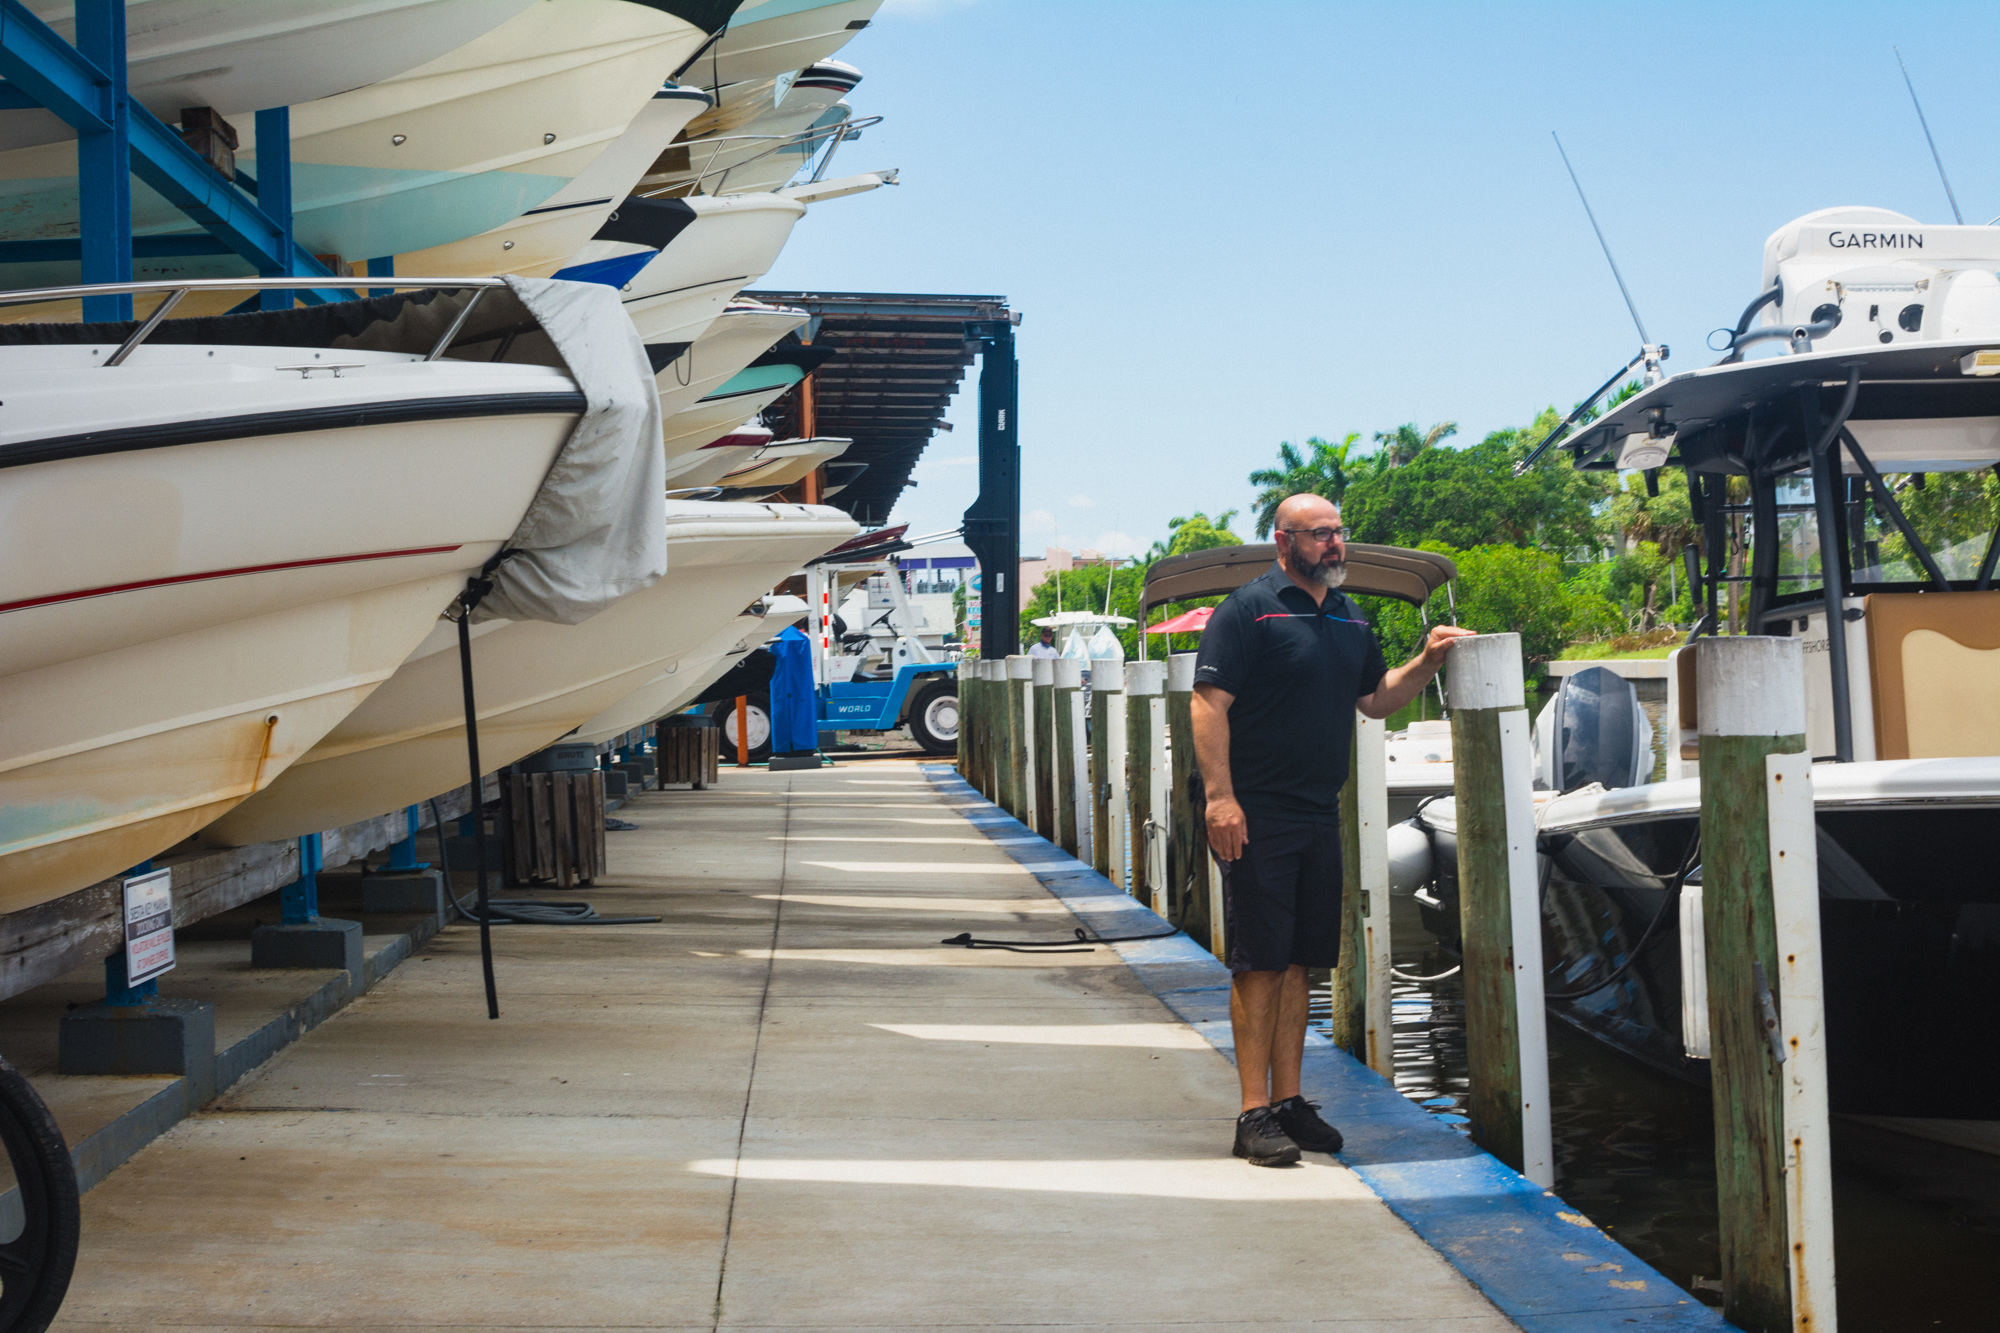 Siesta Key Marina owner Maurice Dentici observes the waters conditions. He has experienced a 60% sales loss compared to last month.